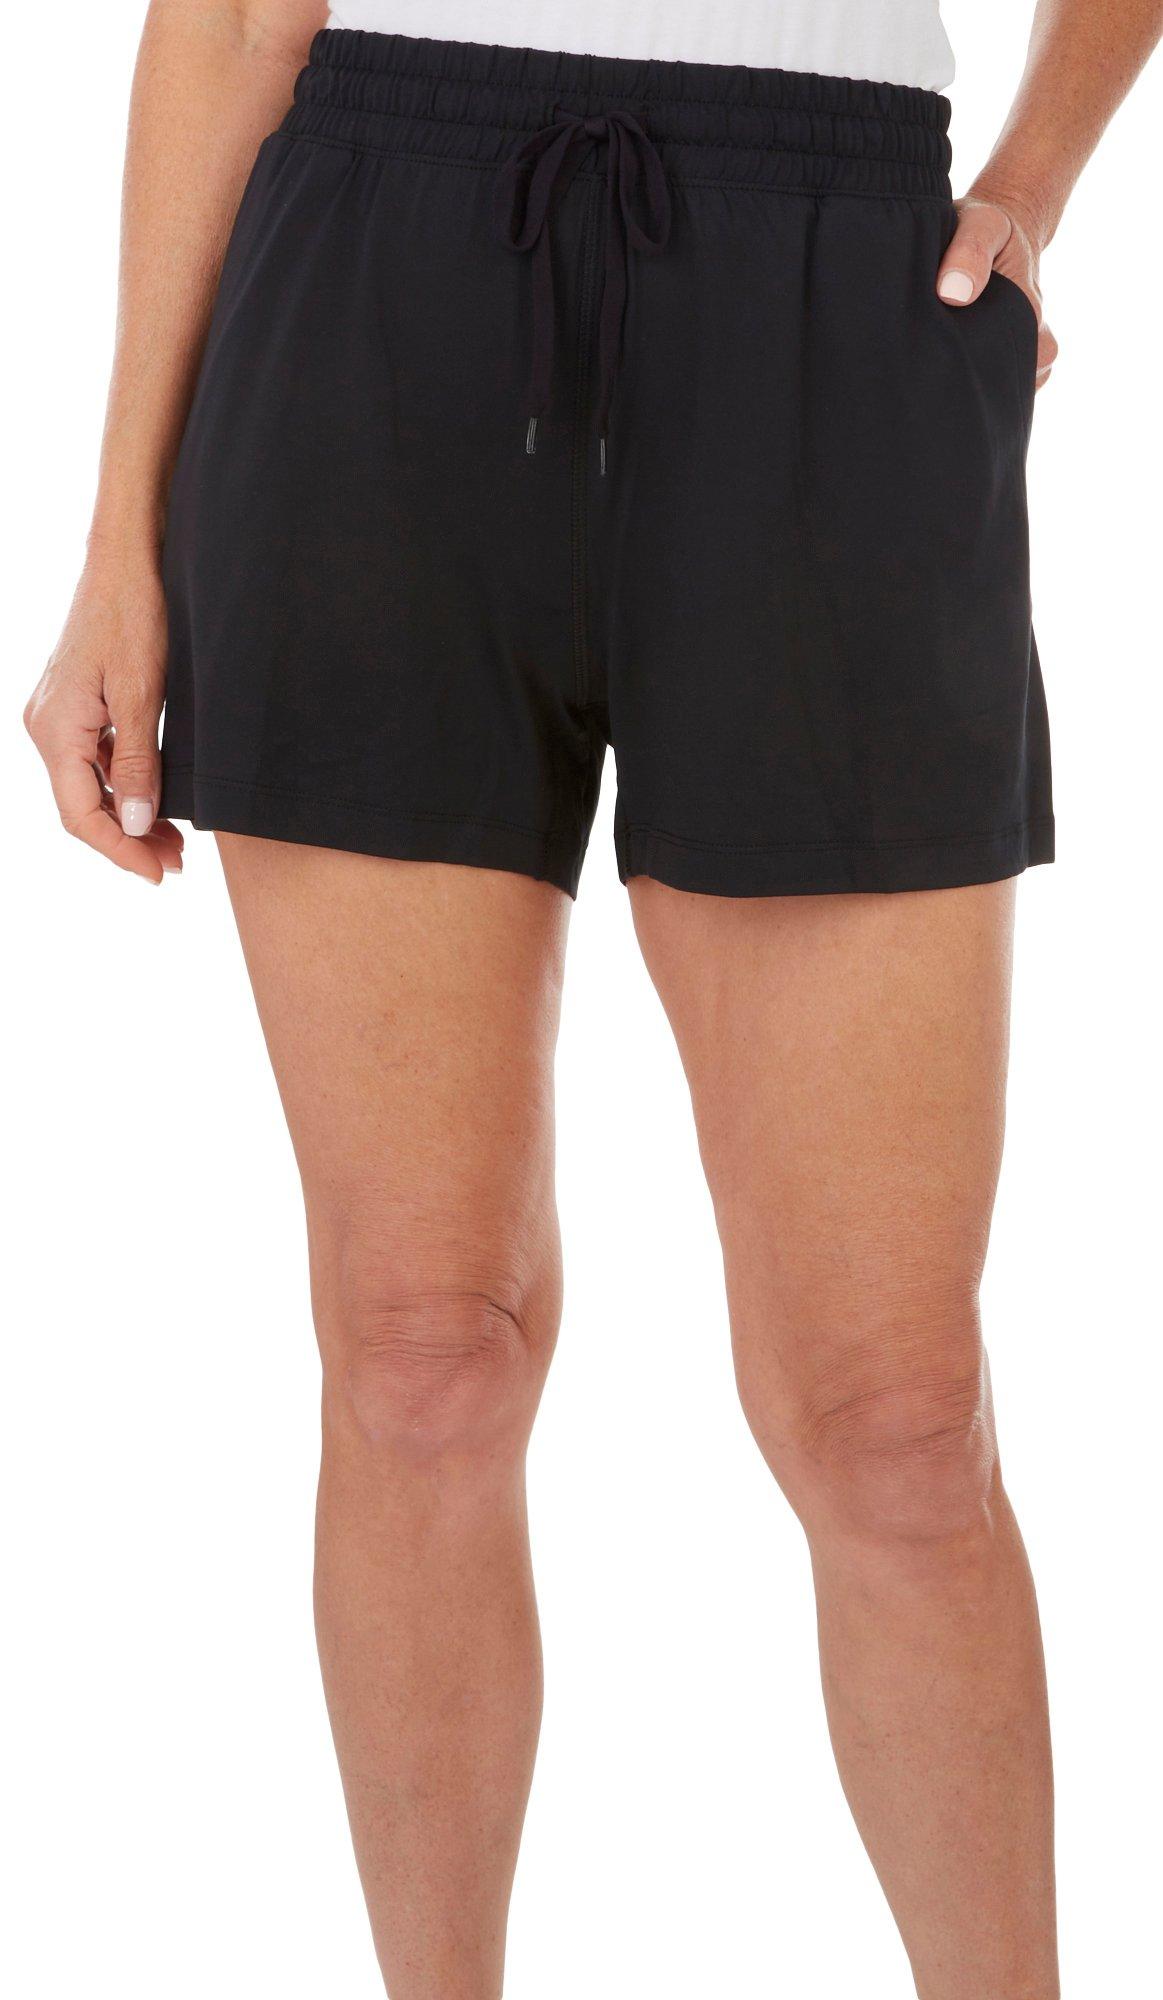 Reel Legends Sports Athletic Shorts for Women